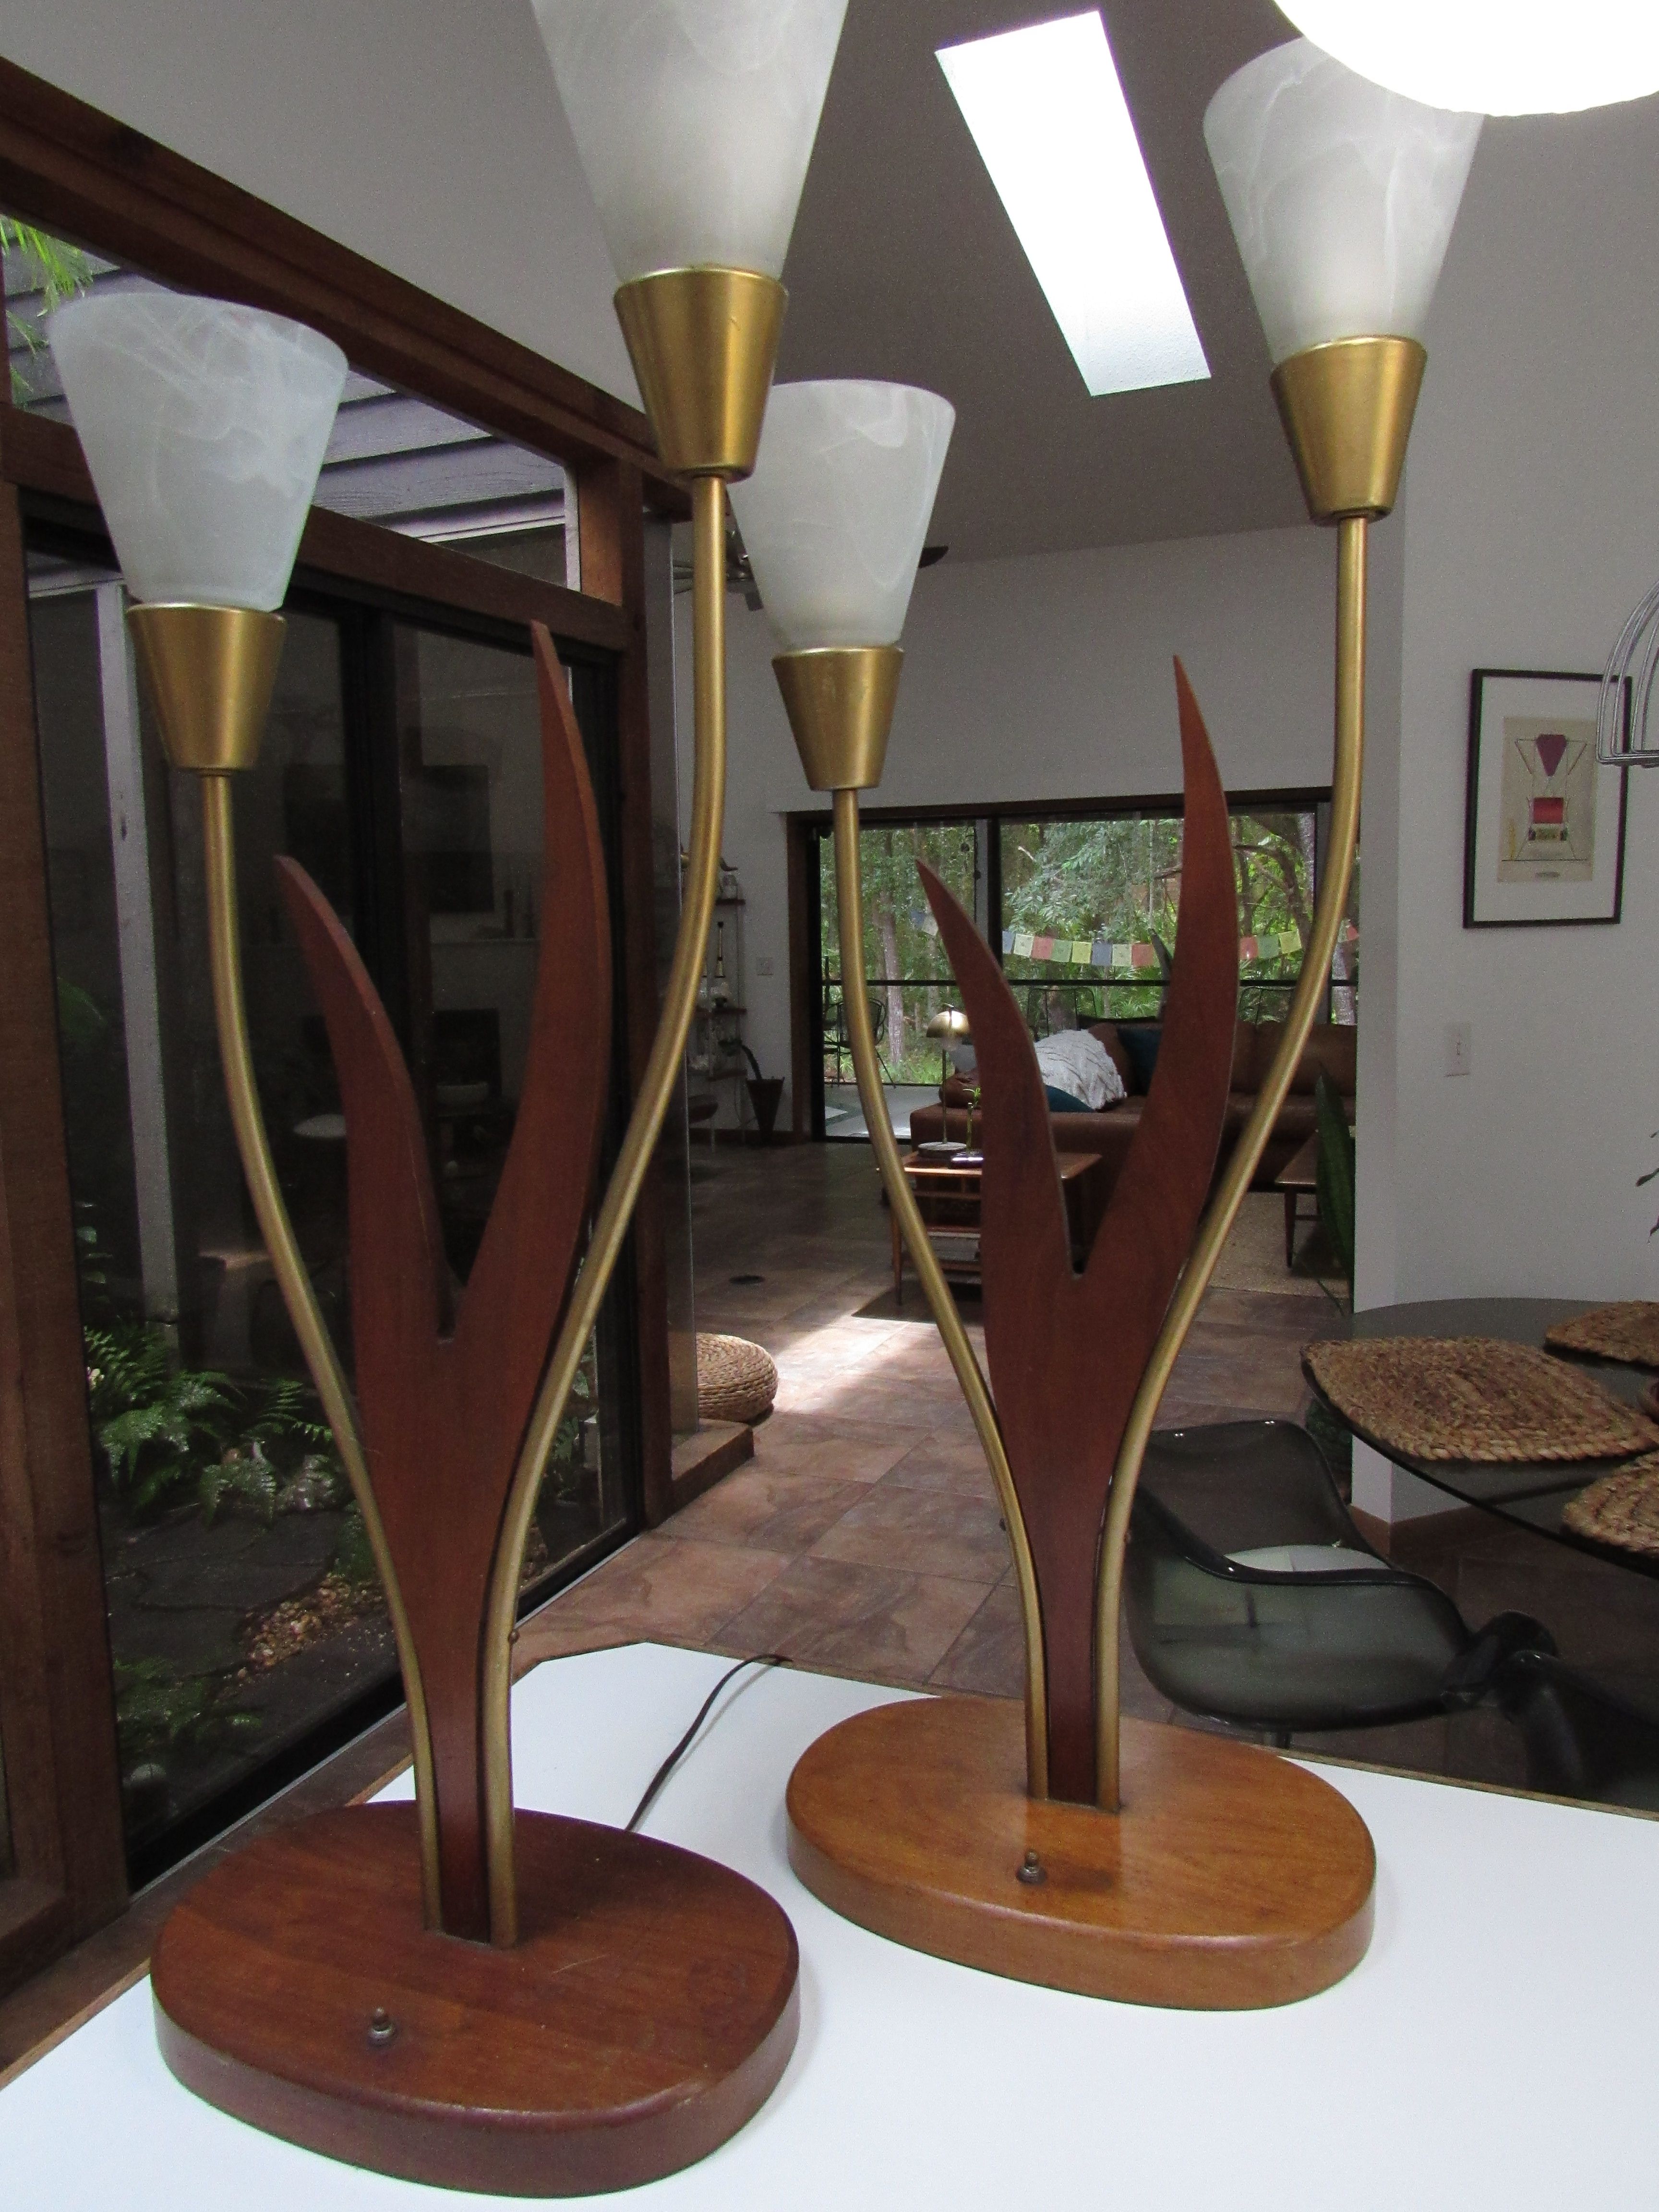 1960's mid century modern wood glass TALL big LAMPS table lamp PAIR lighting eames era gold brass Vintage retro collectible